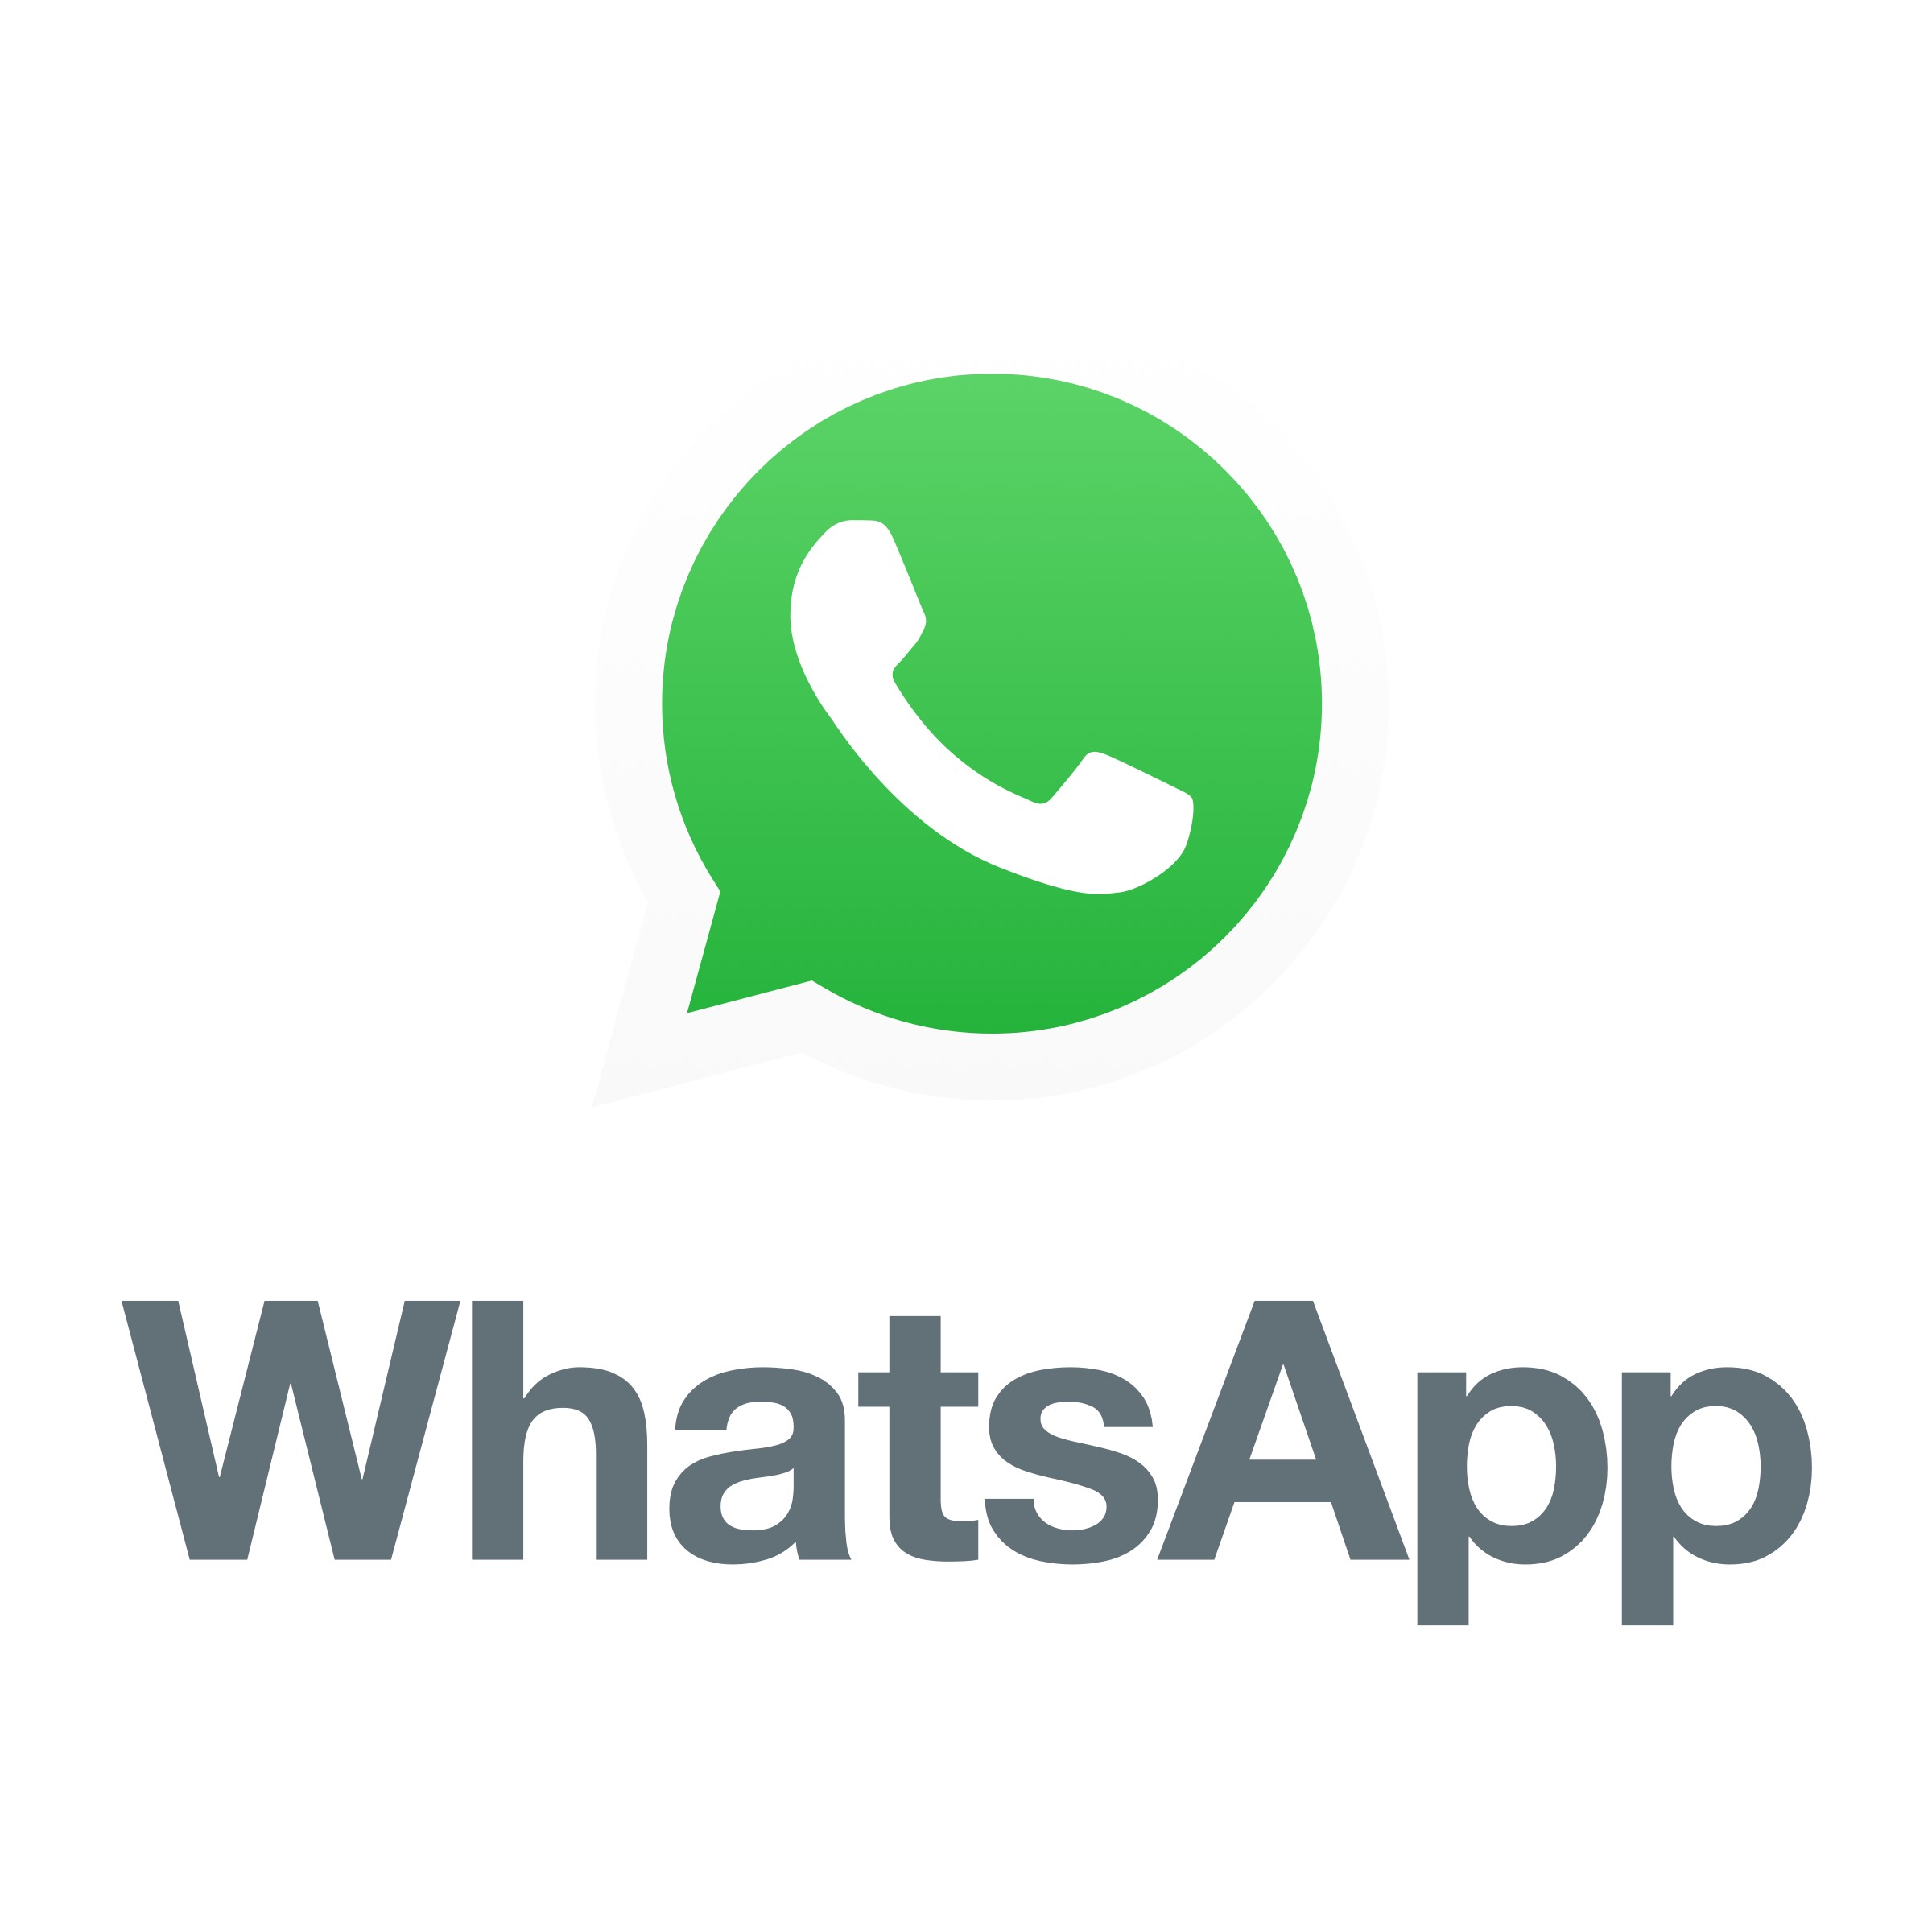 WhatsApp Introduces ‘Secret Code’ Feature for Chat Privacy